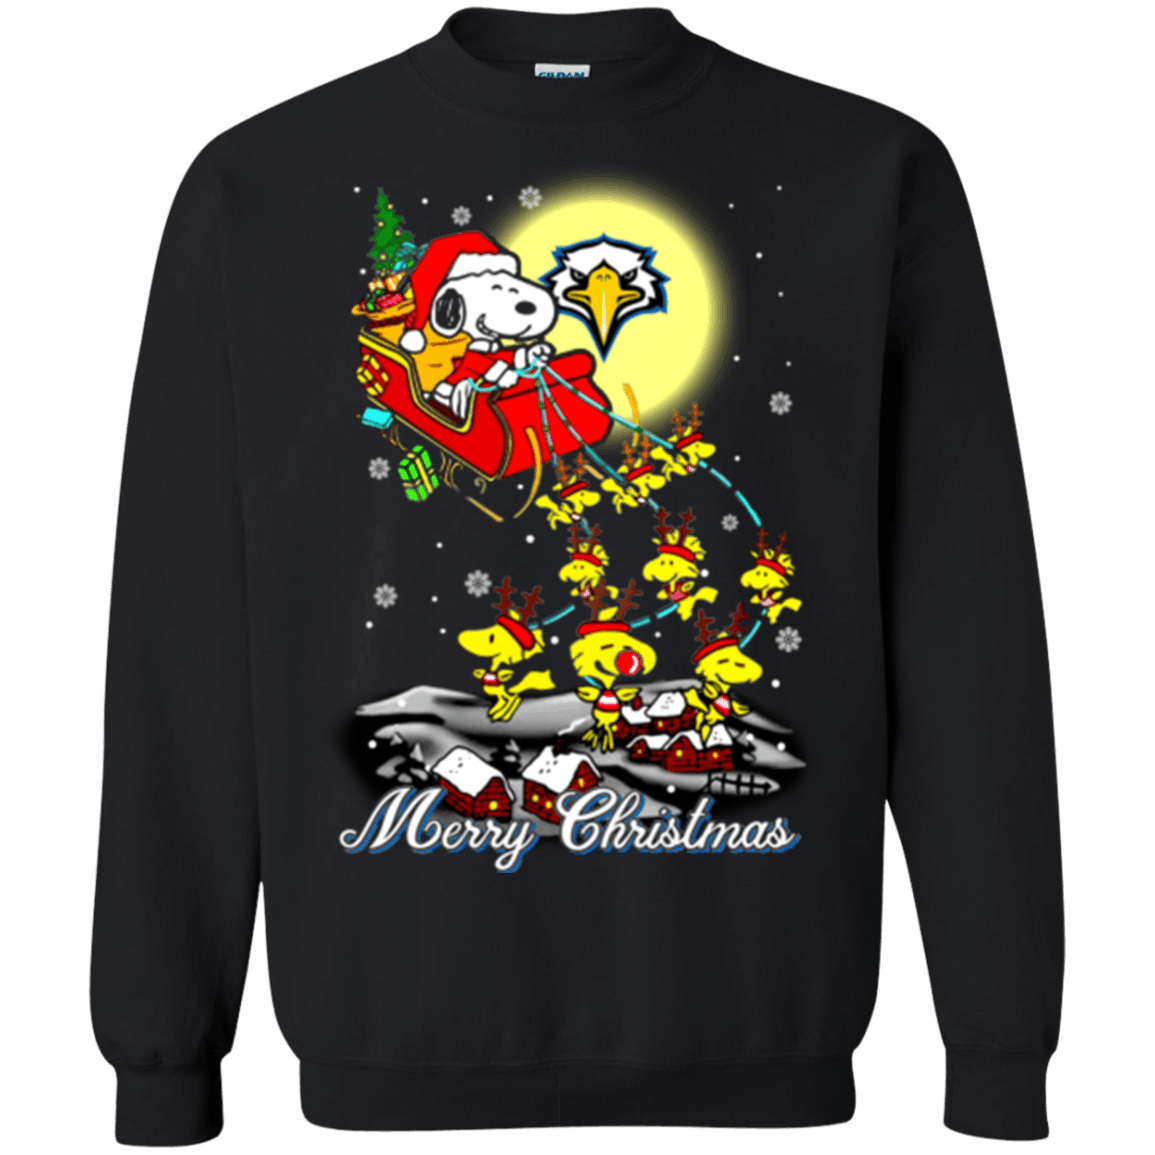 Blithesome Morehead State Eagles Ugly Christmas Sweater 2023S Santa Claus With Sleigh And Snoopy Sweatshirts